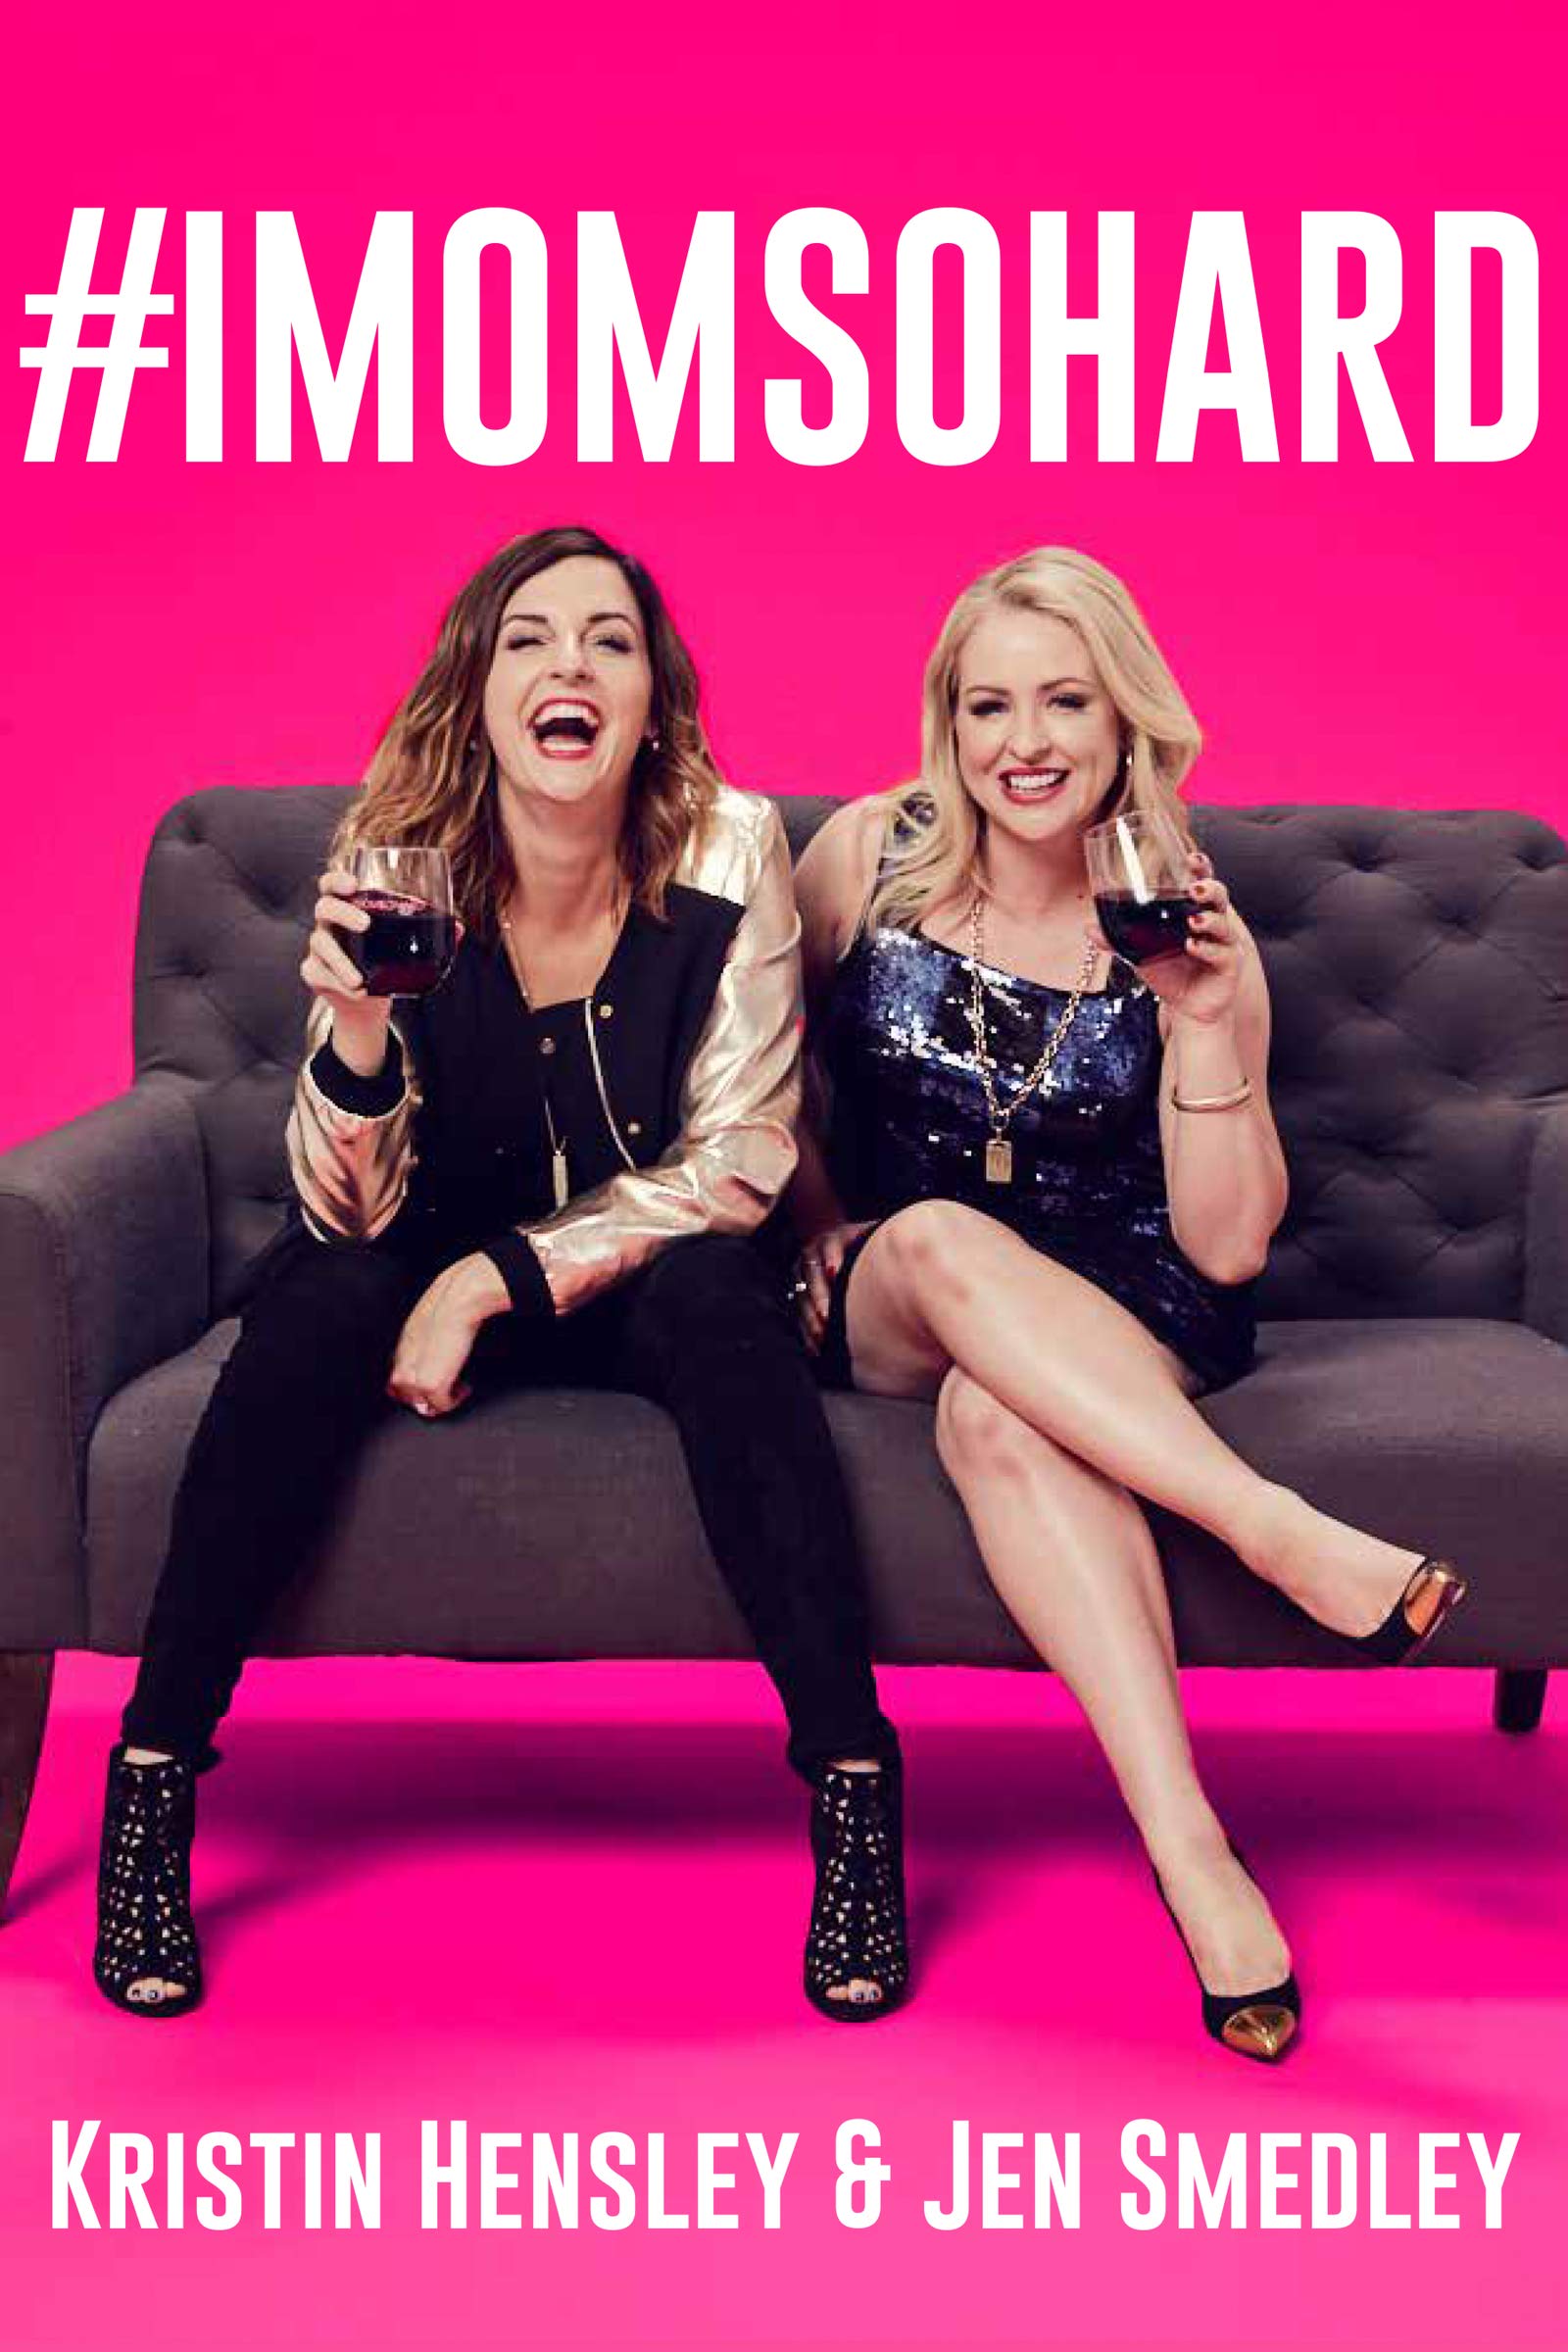 Kristin Hensley (B.A. Theatre 1998) and Jen Smedley have written a book, "IMomSoHard," based on their popular web series of the same name. The book will be released April 2. 